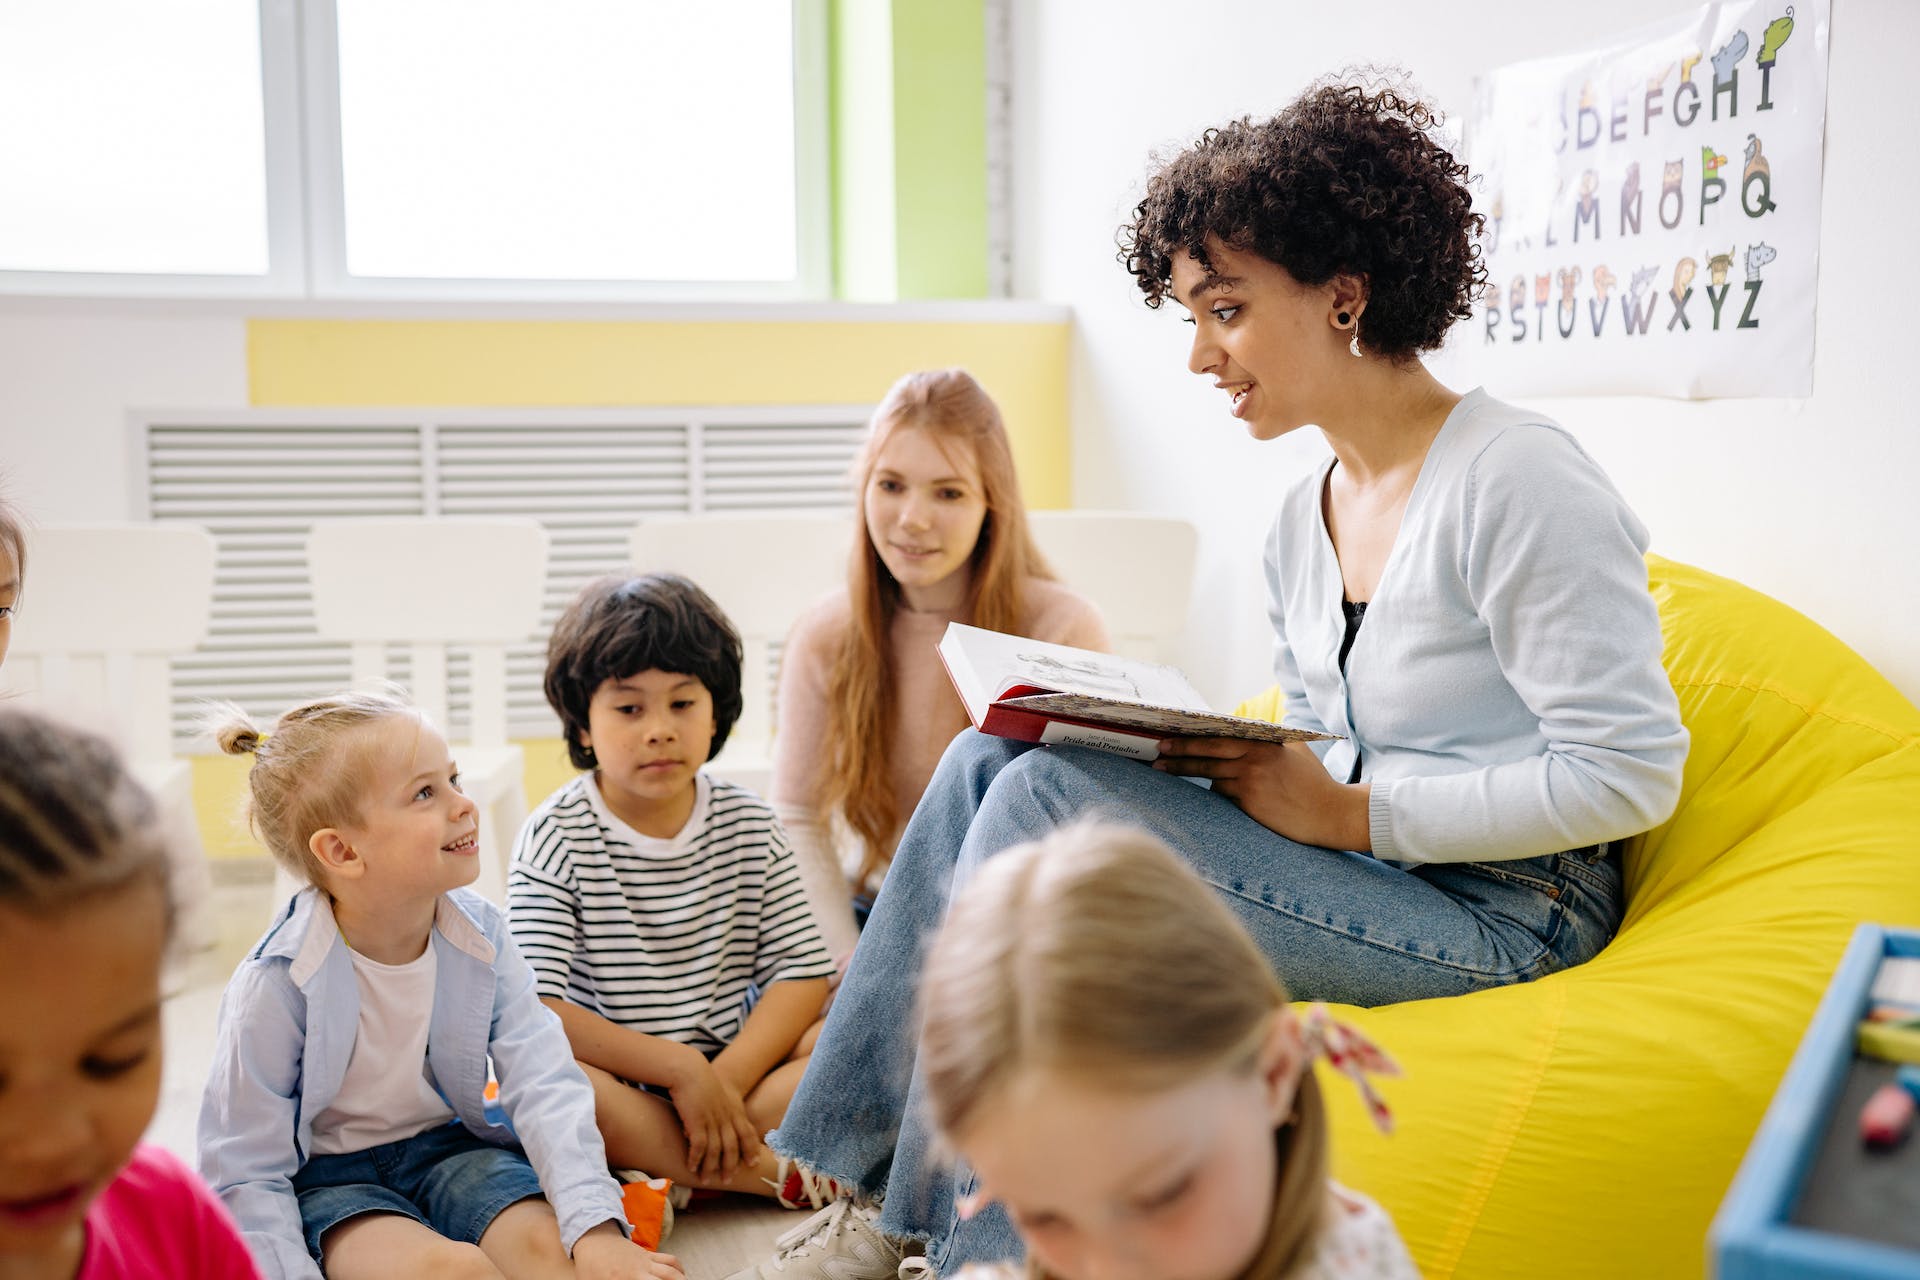 A teacher reading a book to her students | Source: Pexels